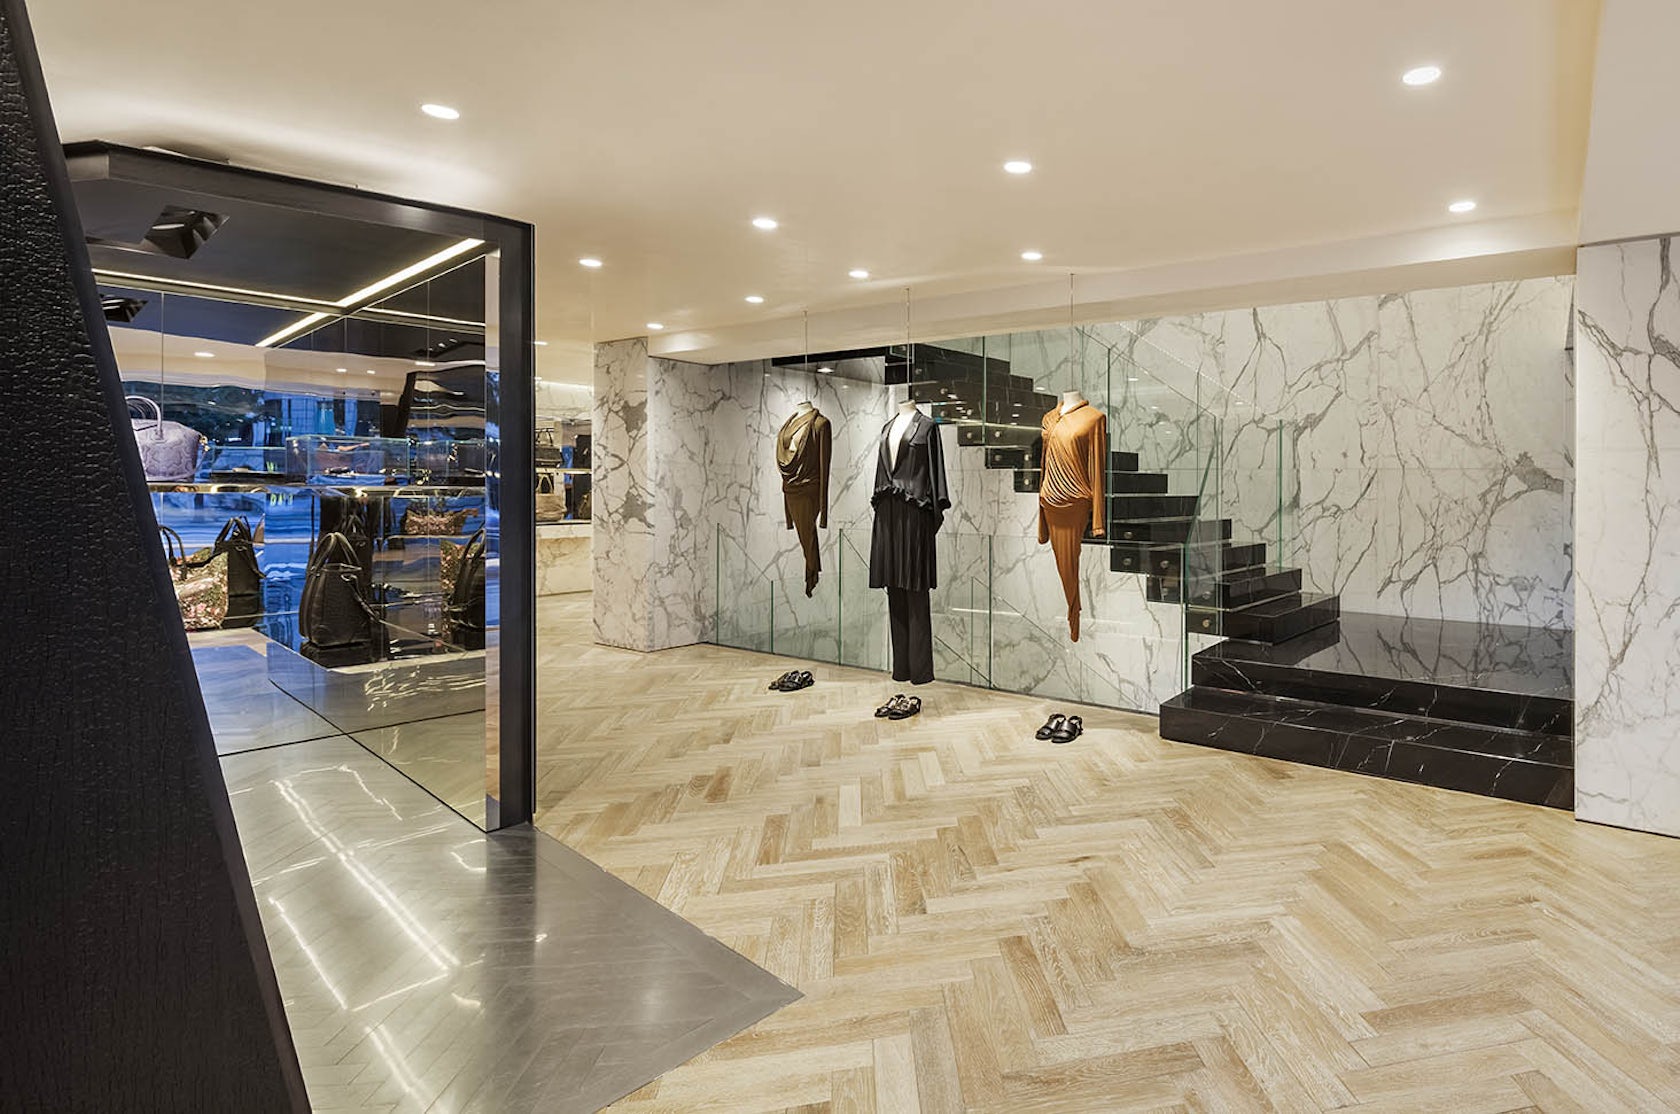 Givenchy Flagship Store by Piuarch - Architizer